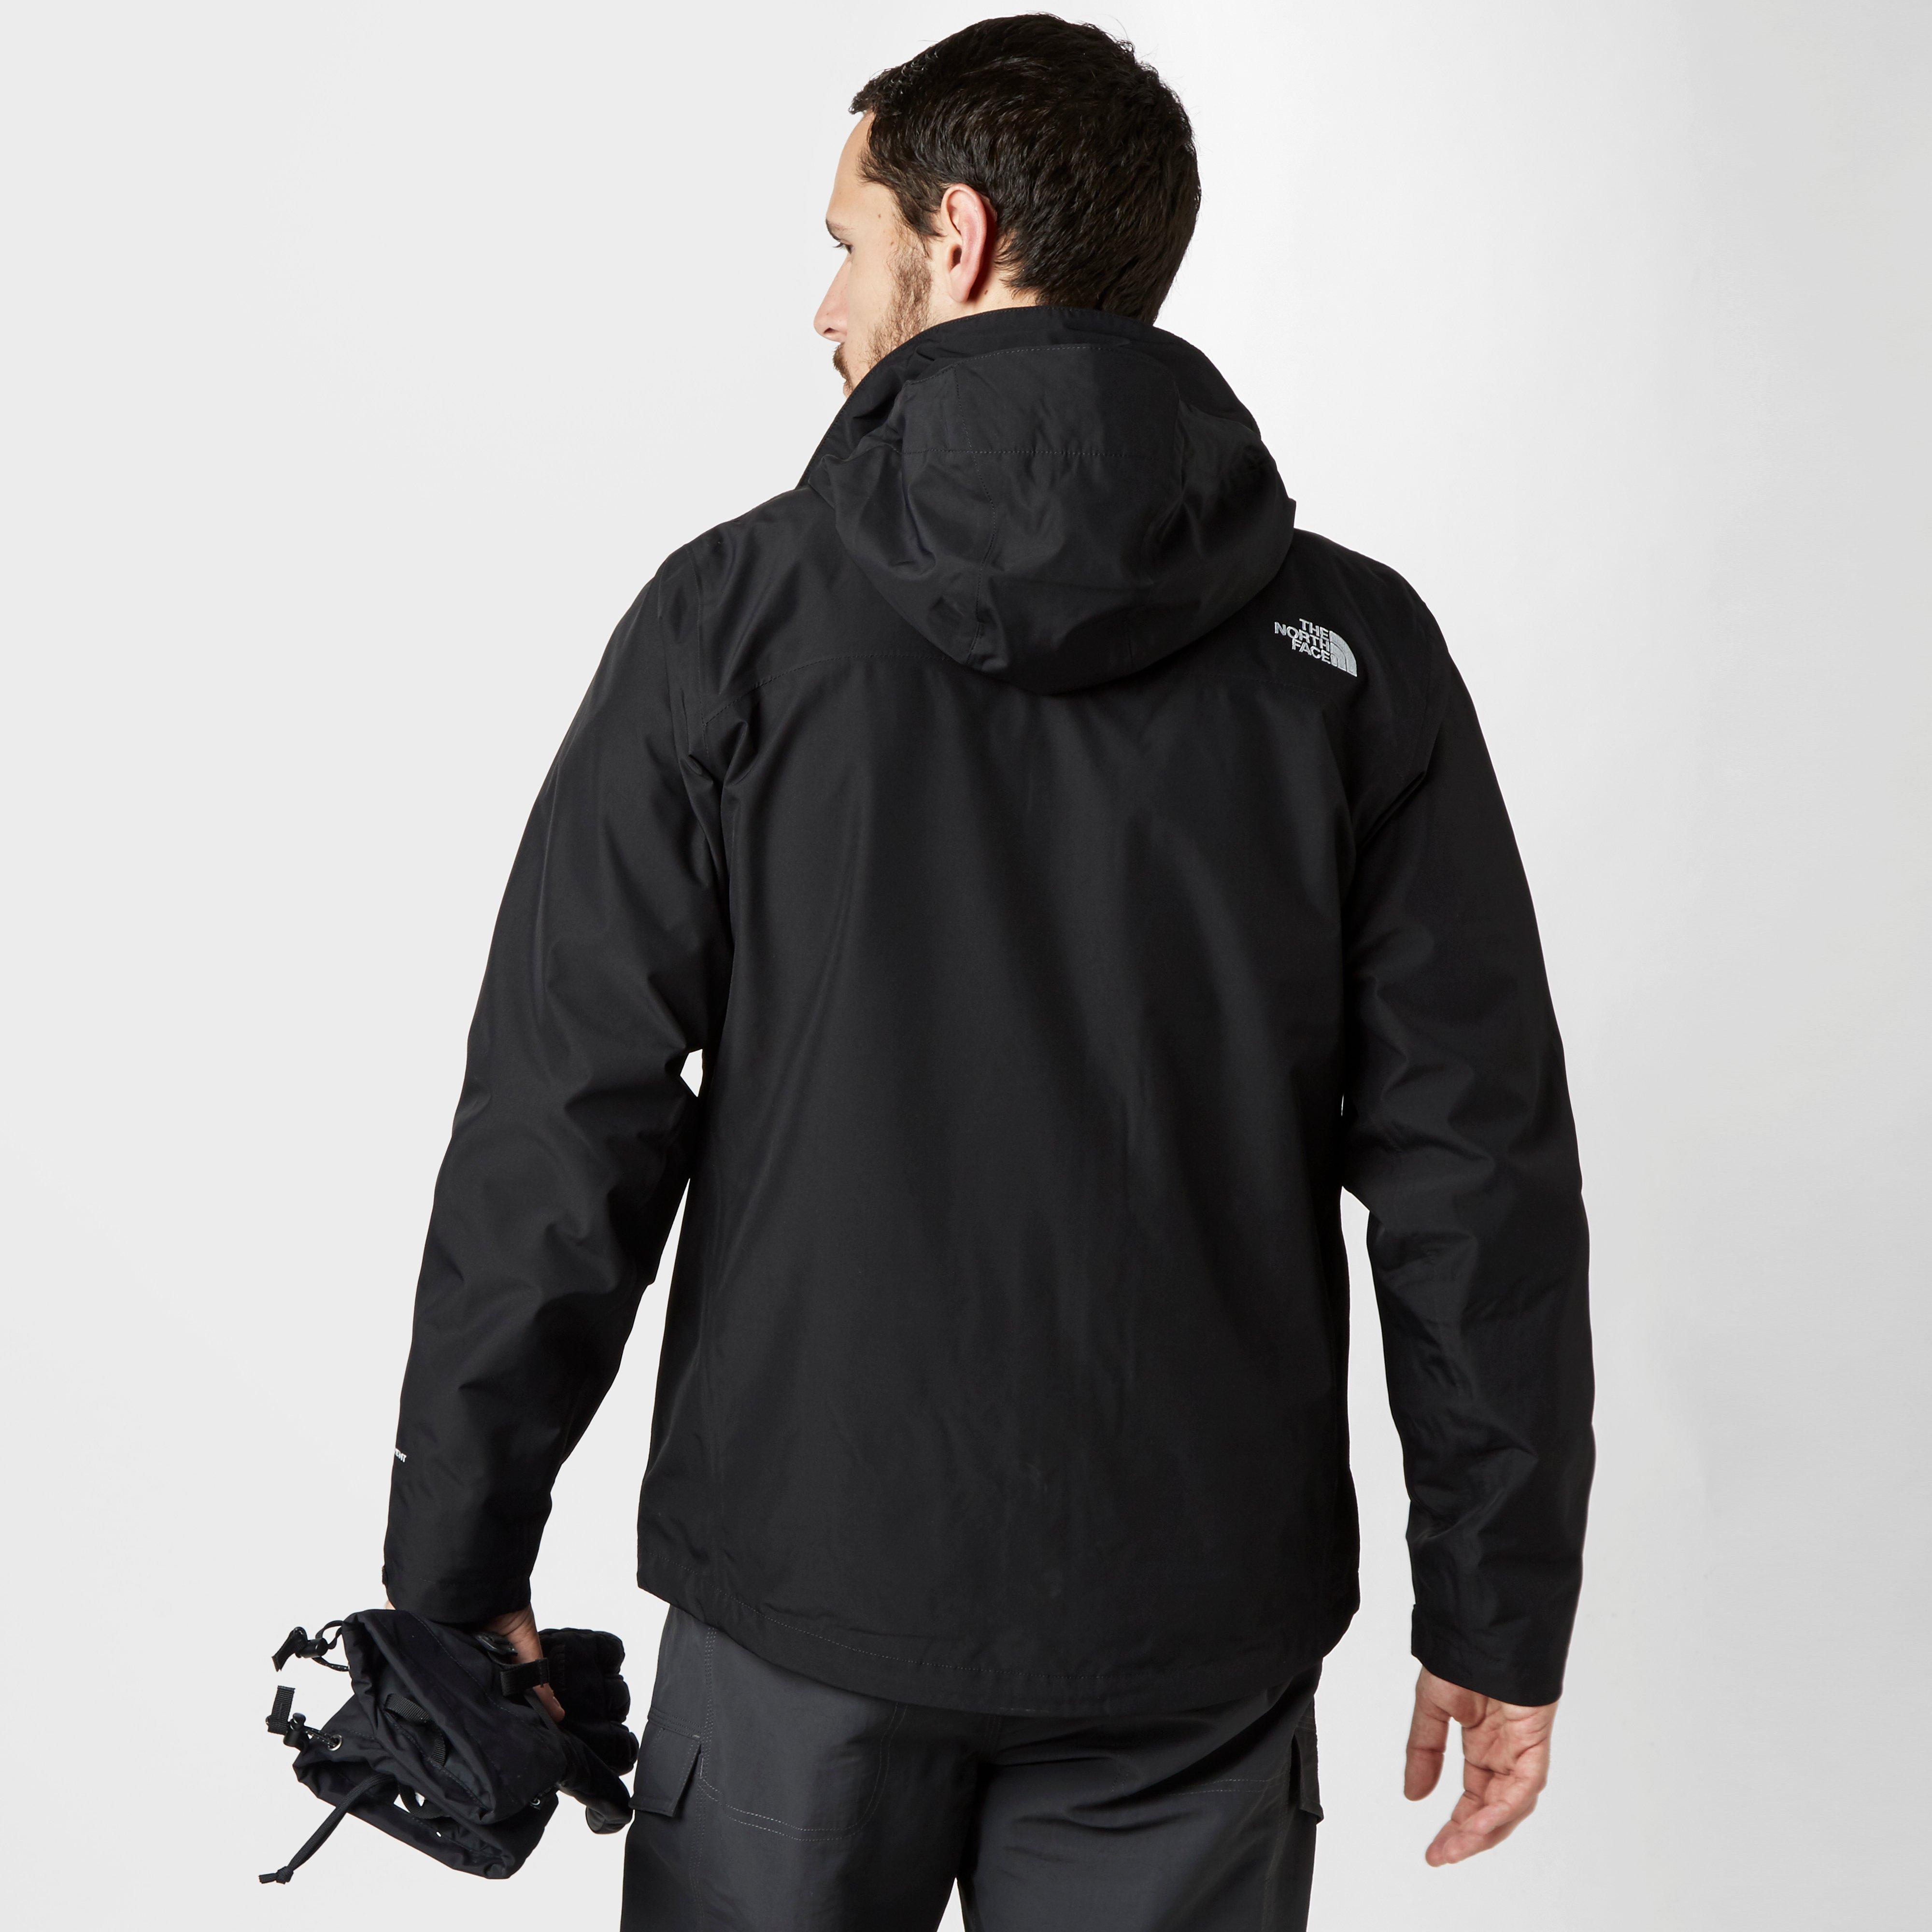 north face sangro review